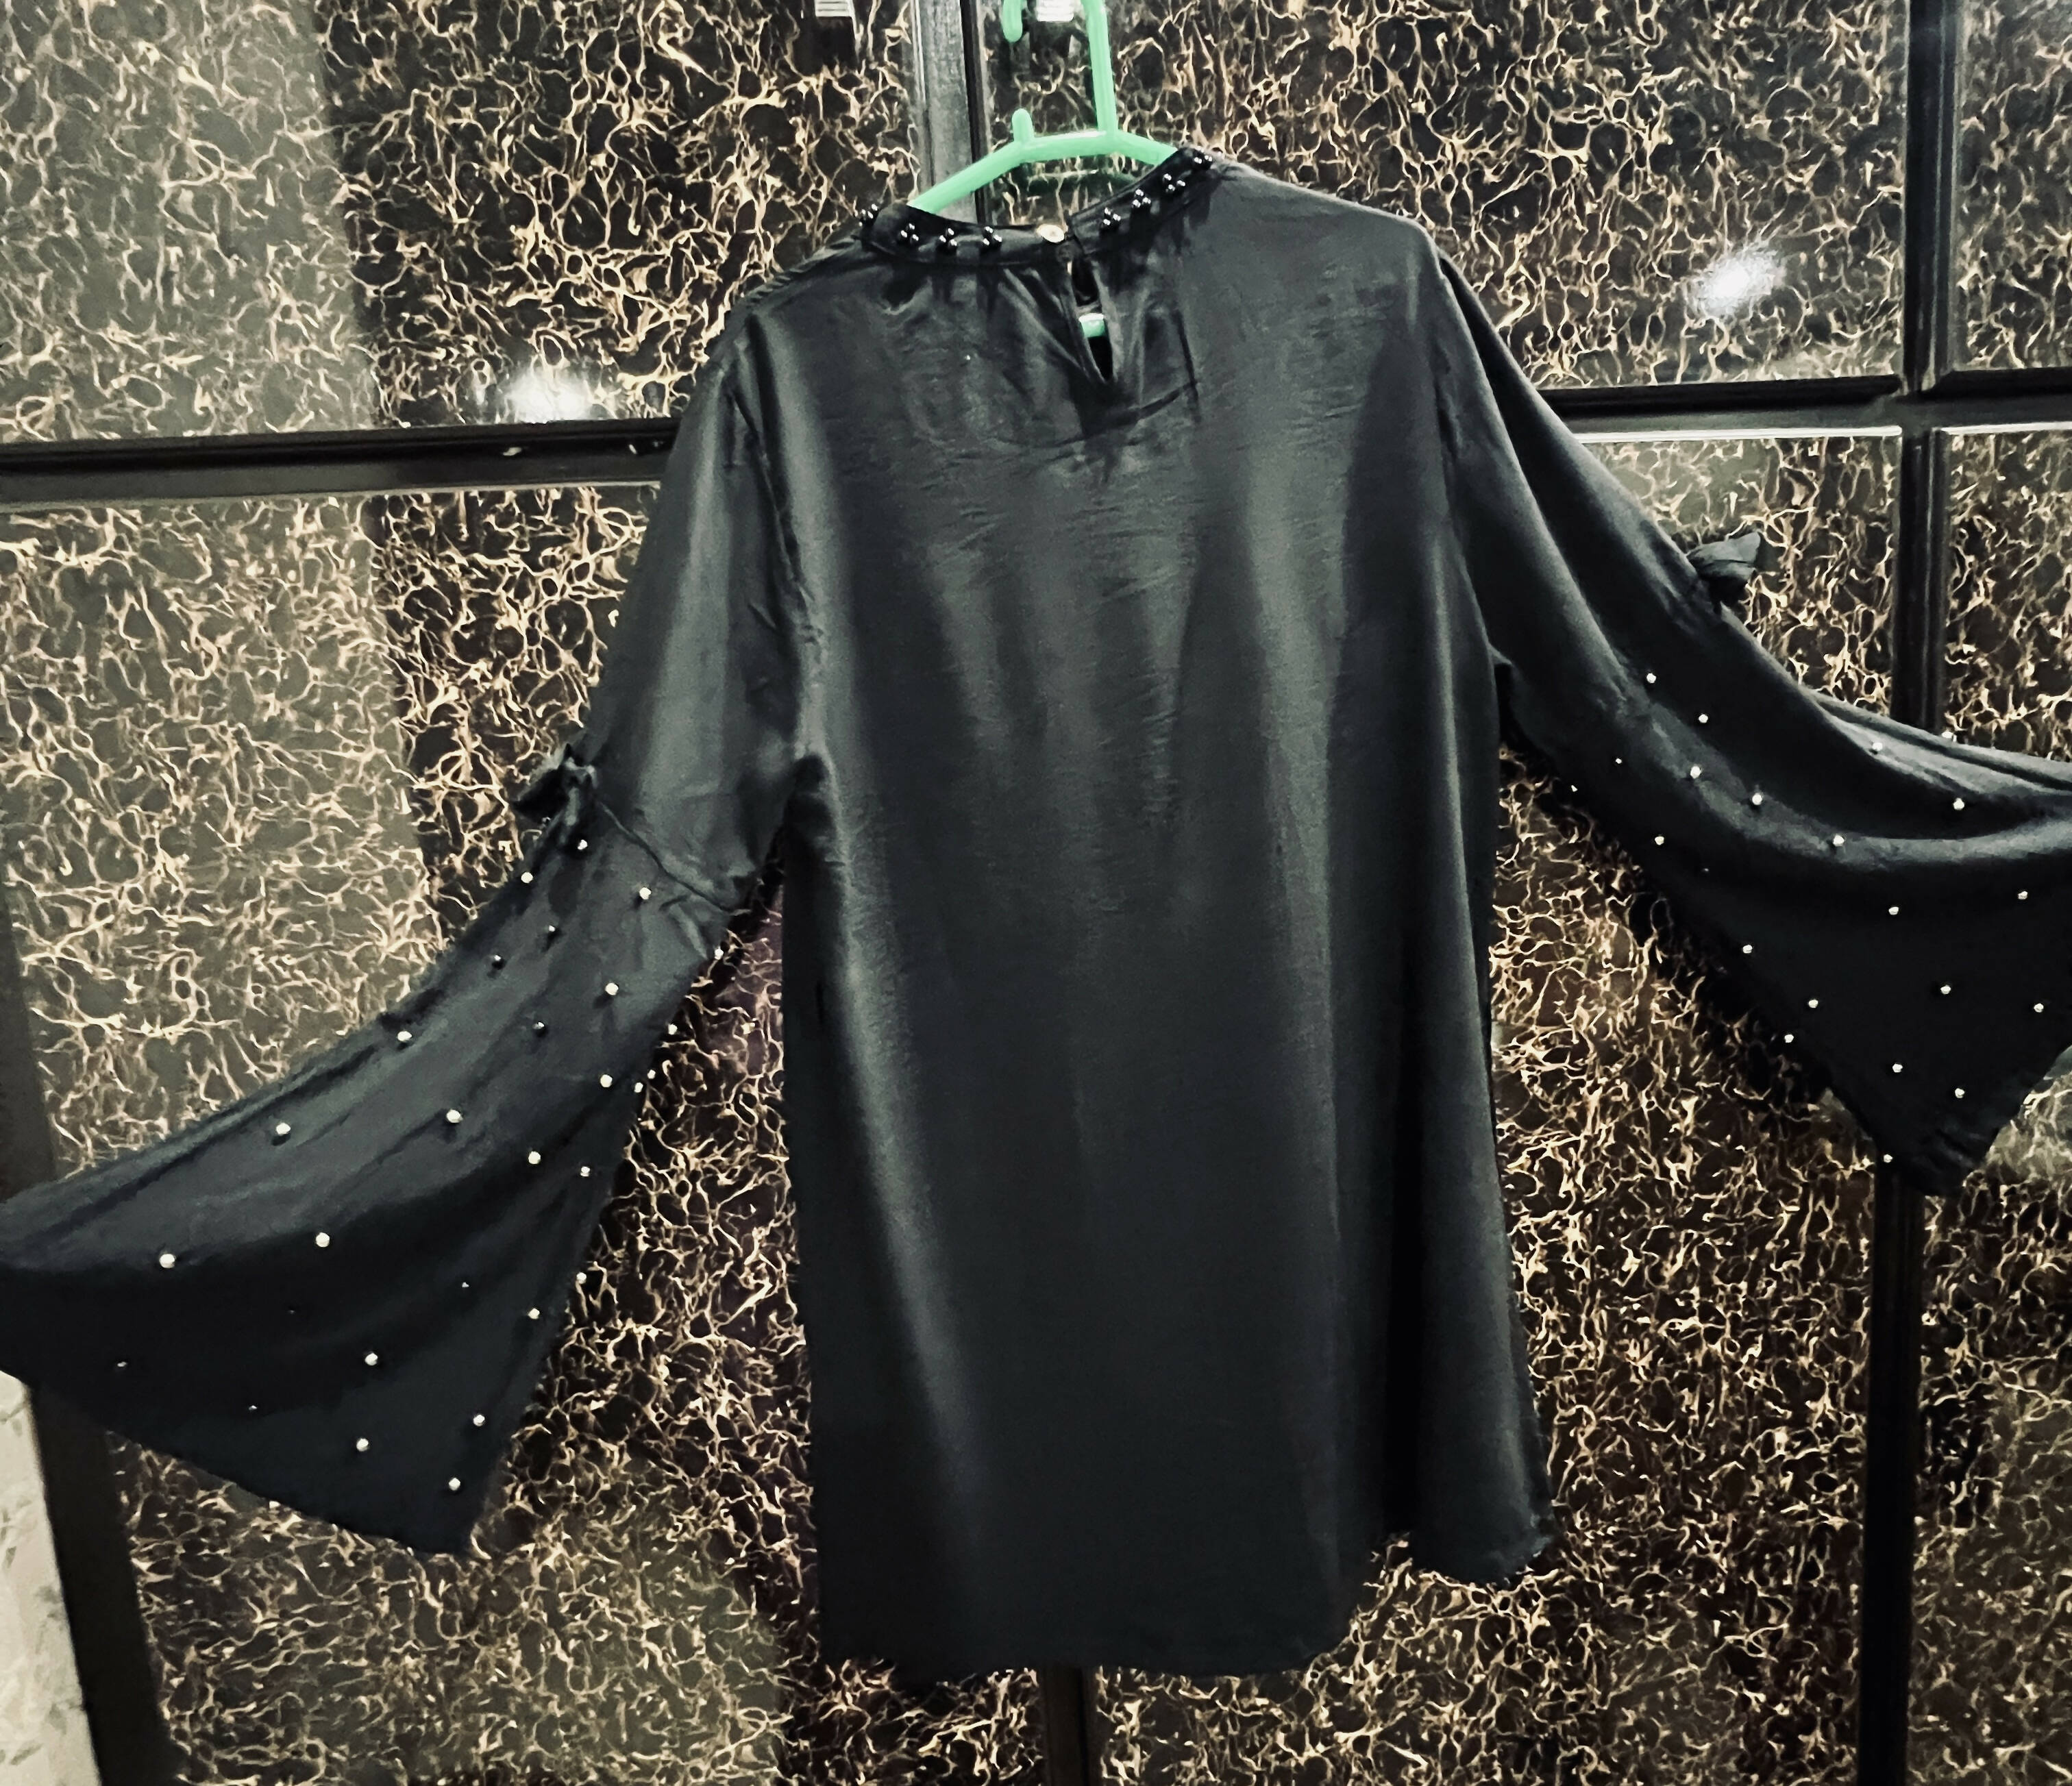 Black Top (Size: M ) | Women Tops & Shirts | Worn Once